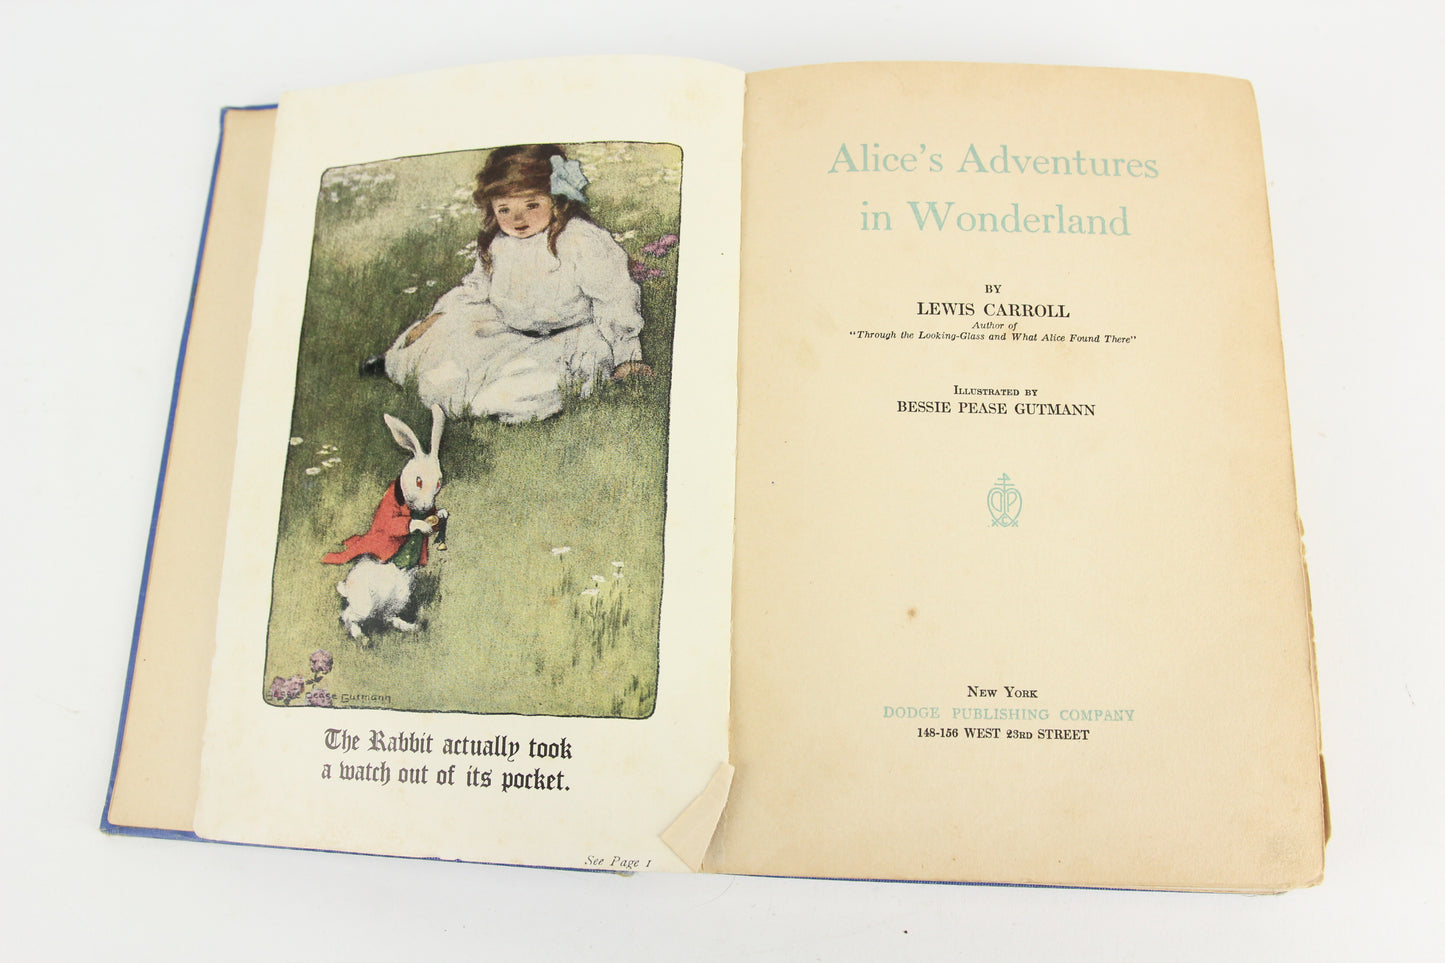 Alice's Adventures in Wonderland (Illustrated) by Lewis Carroll, Copyright 1907